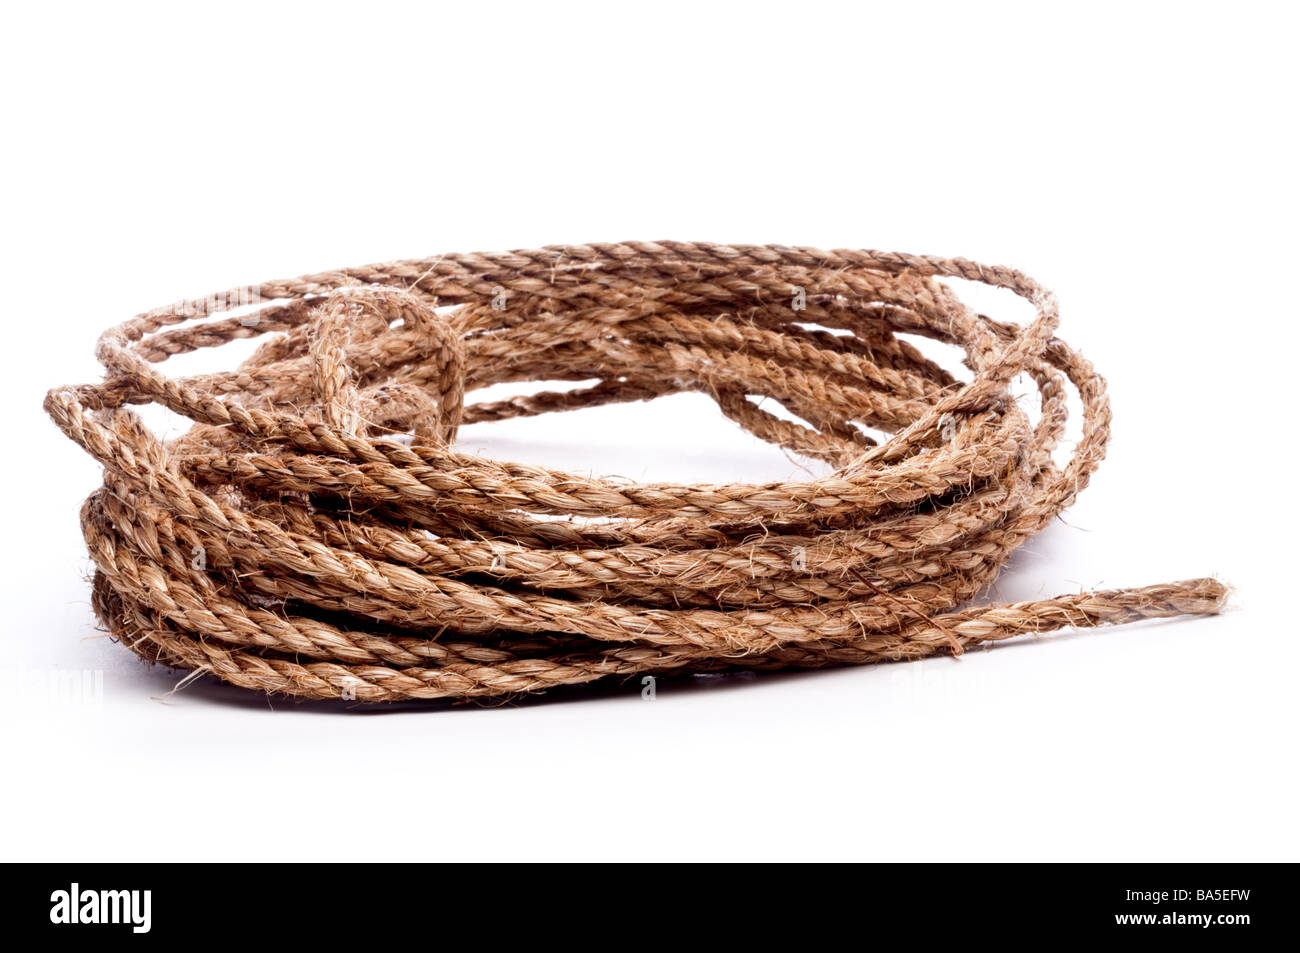 A horizontal view of a coil of rope on white Stock Photo